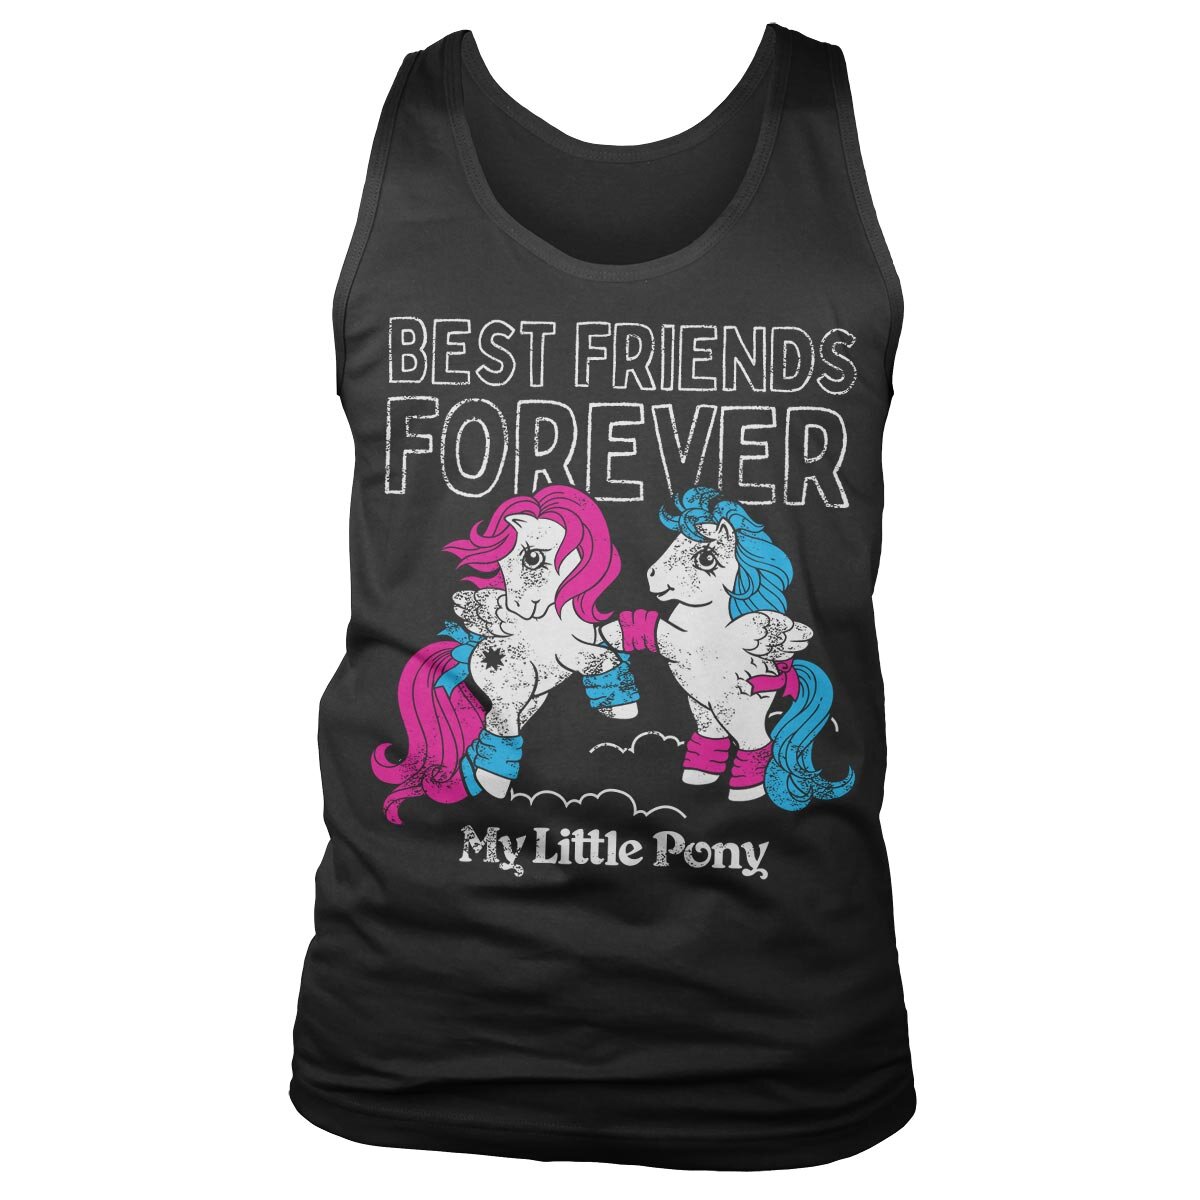 Best Friends Forever Tank Top